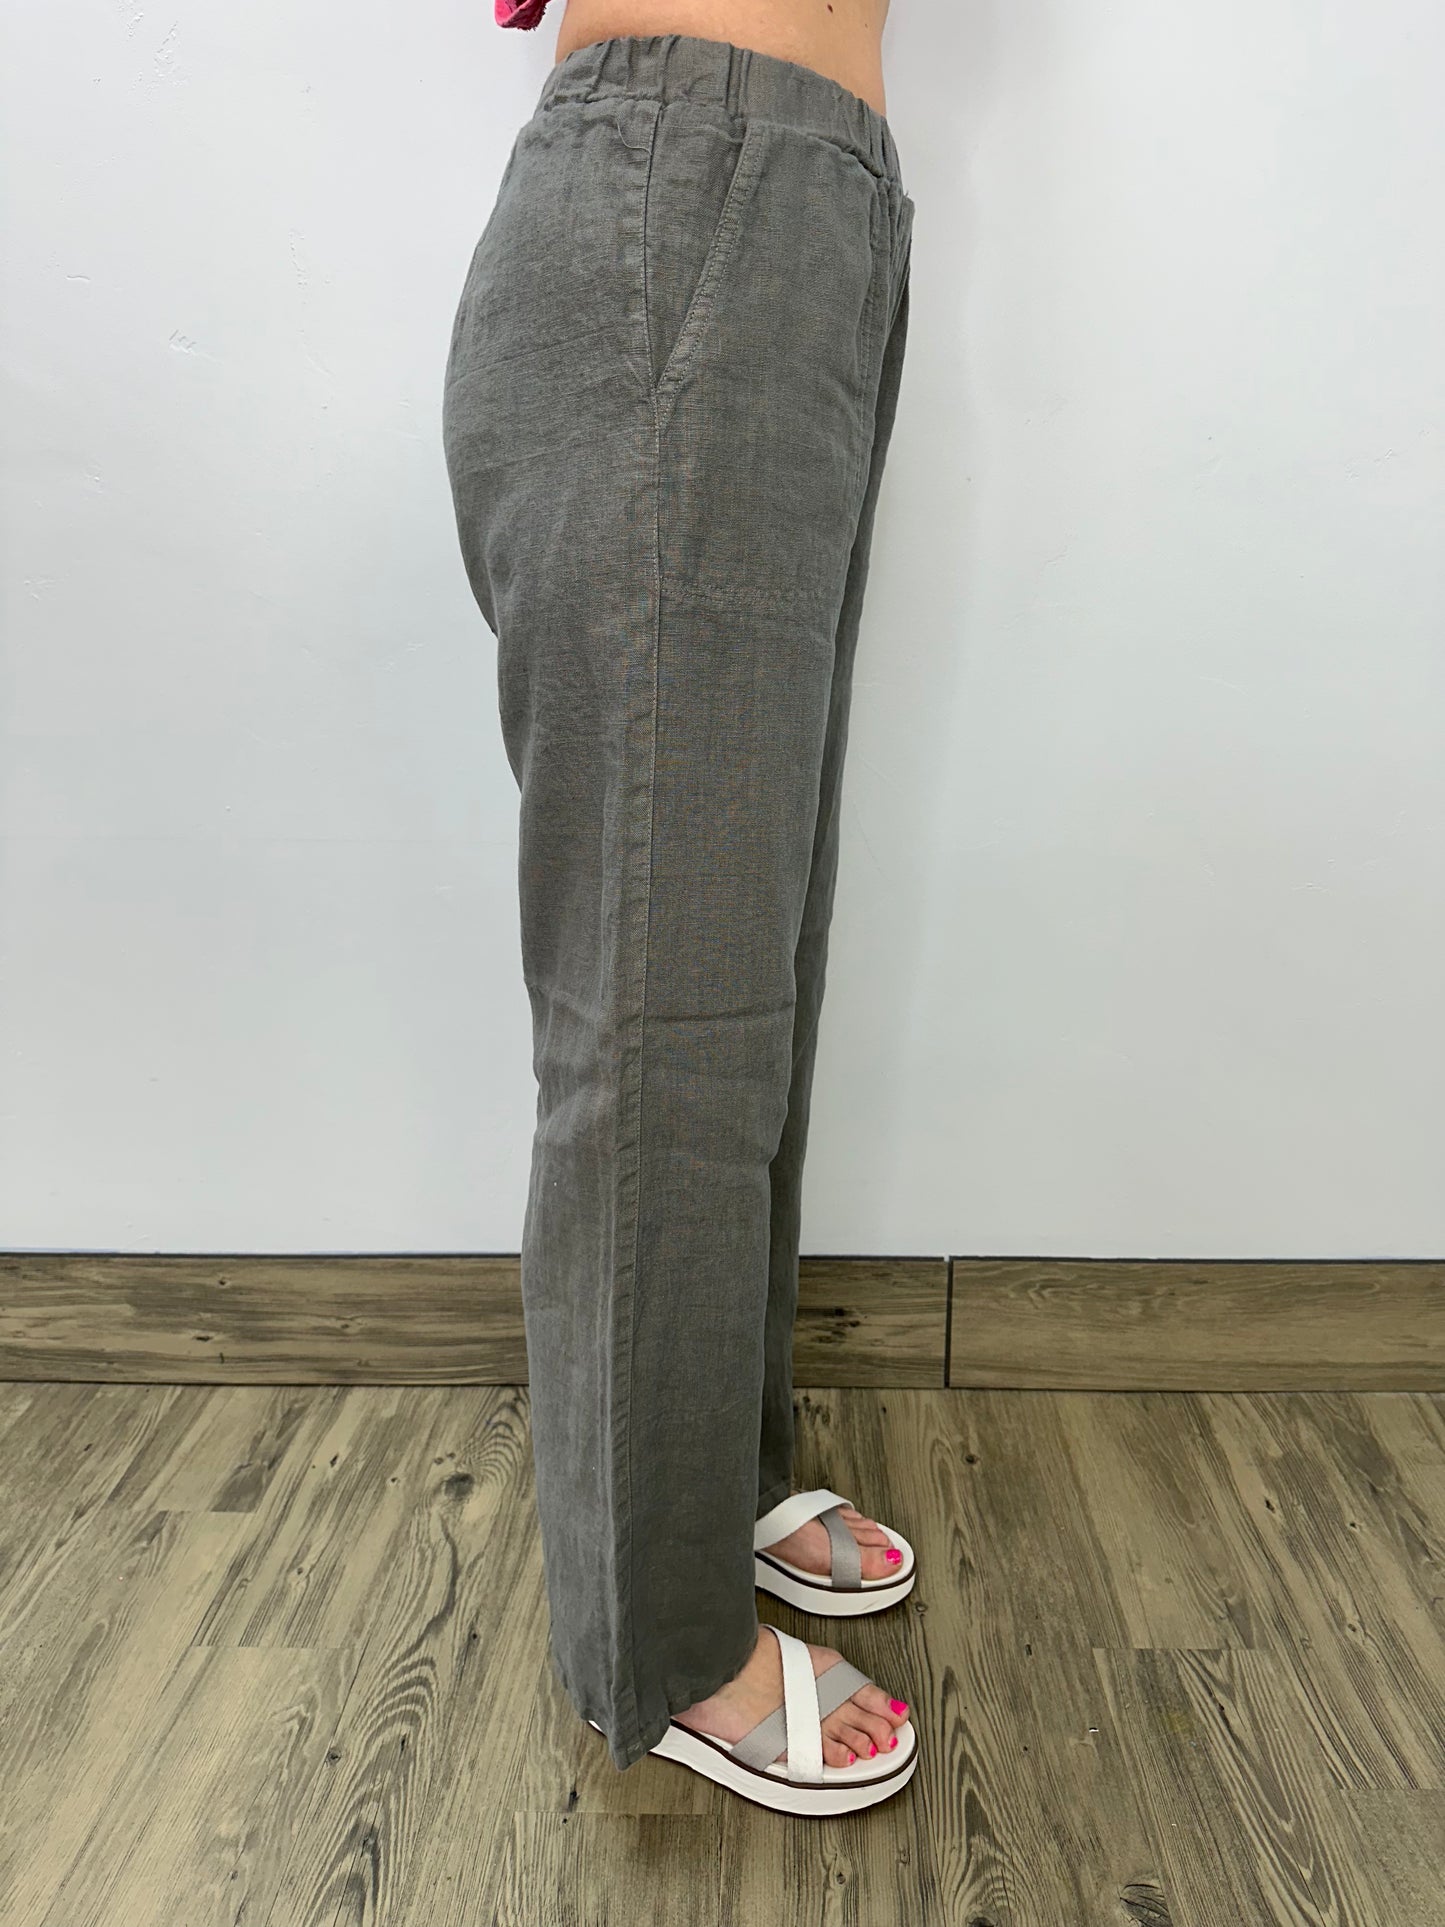 Solid Grey Linen Long Pant with Pockets